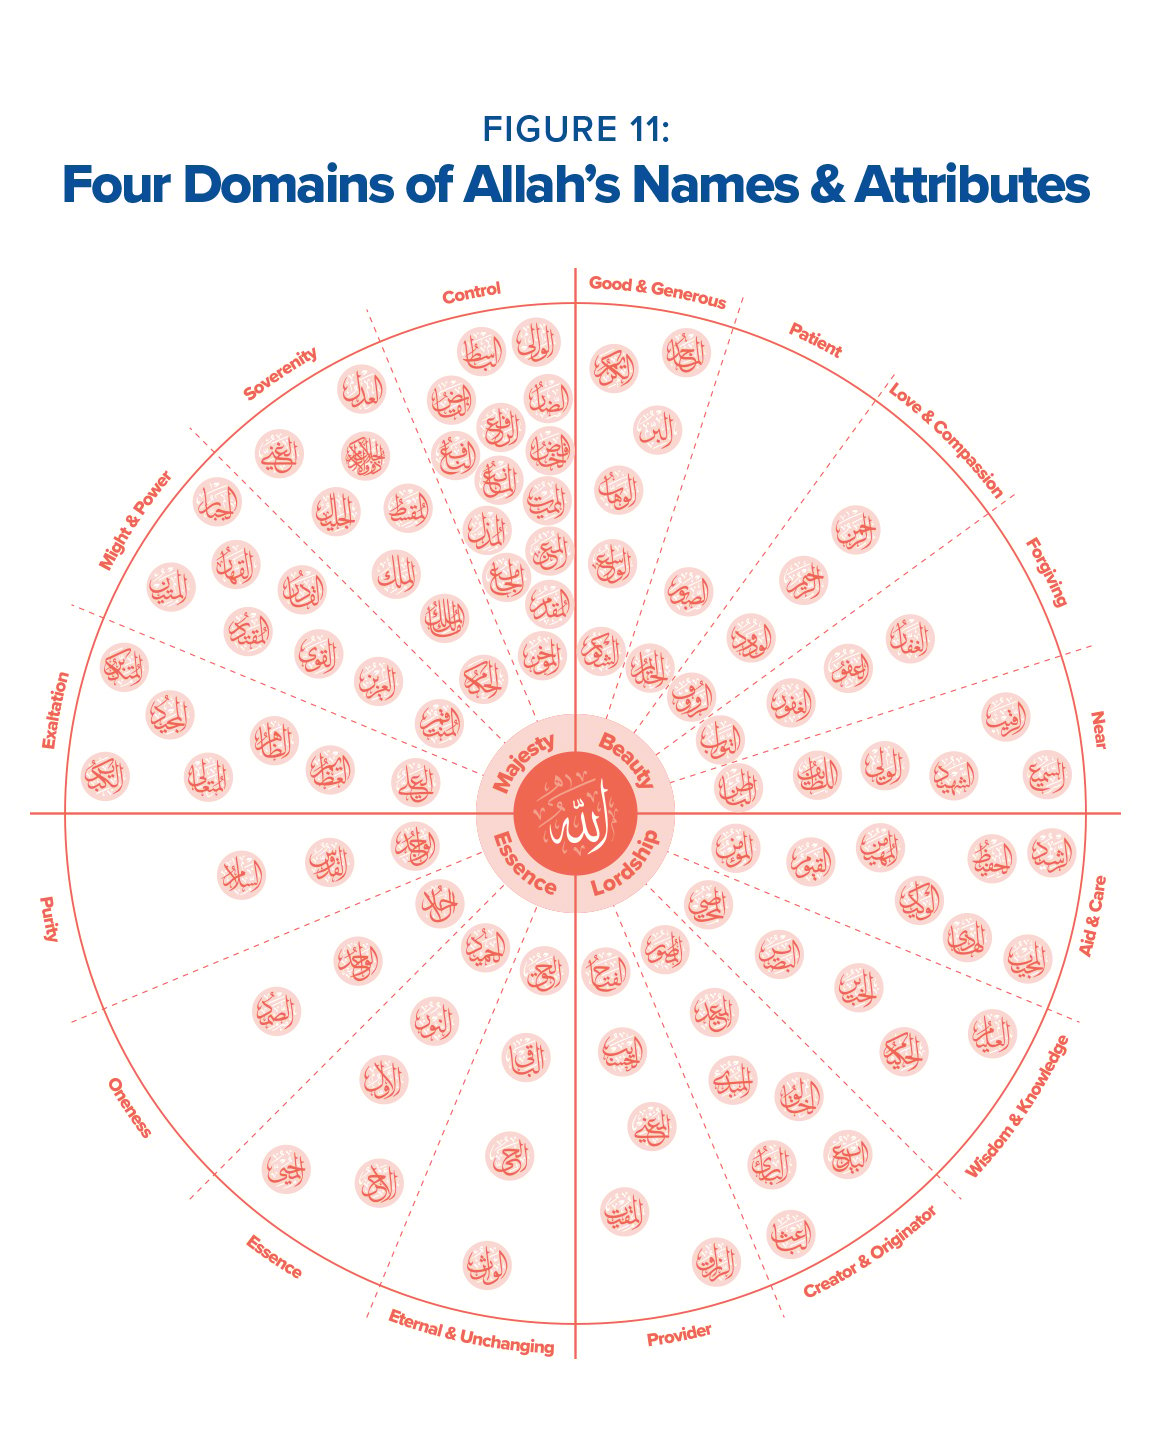 Four domains of Allah's names & attributes